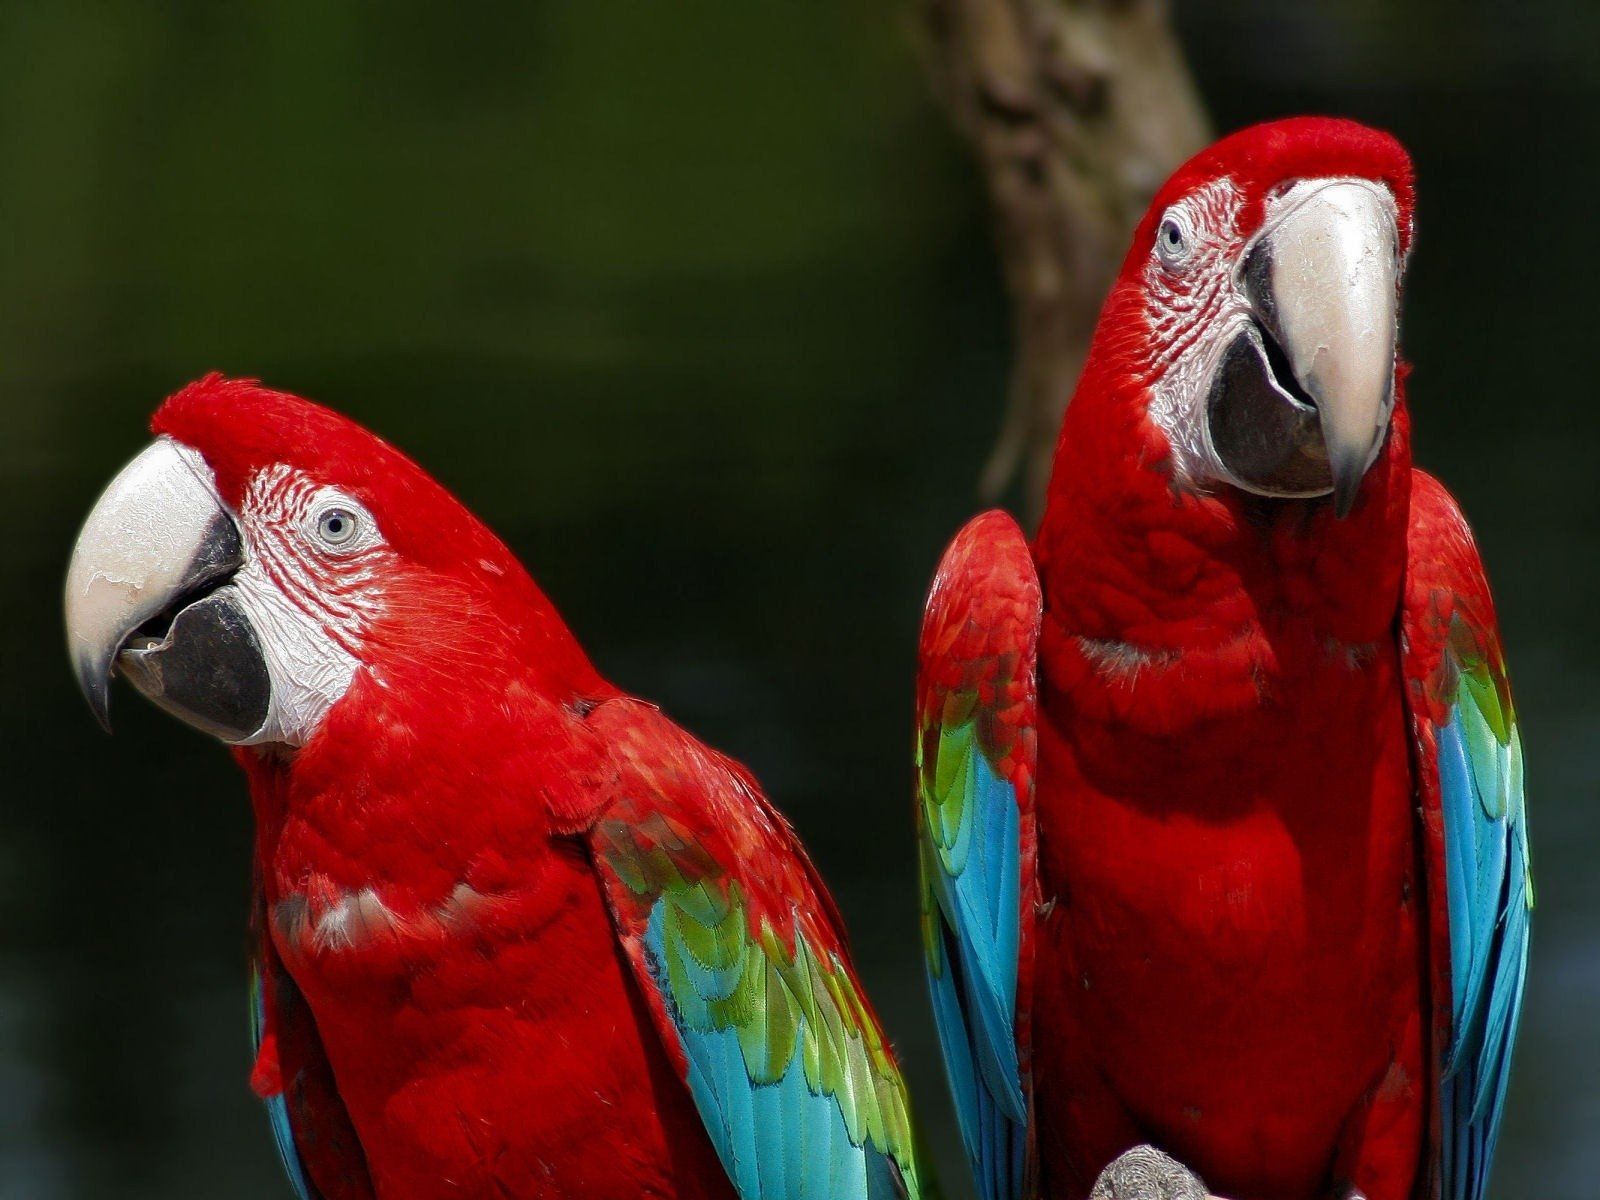 Animal Red And Green Macaw Wallpaper. Parrot Wallpaper, Parrot, Parrot Bird